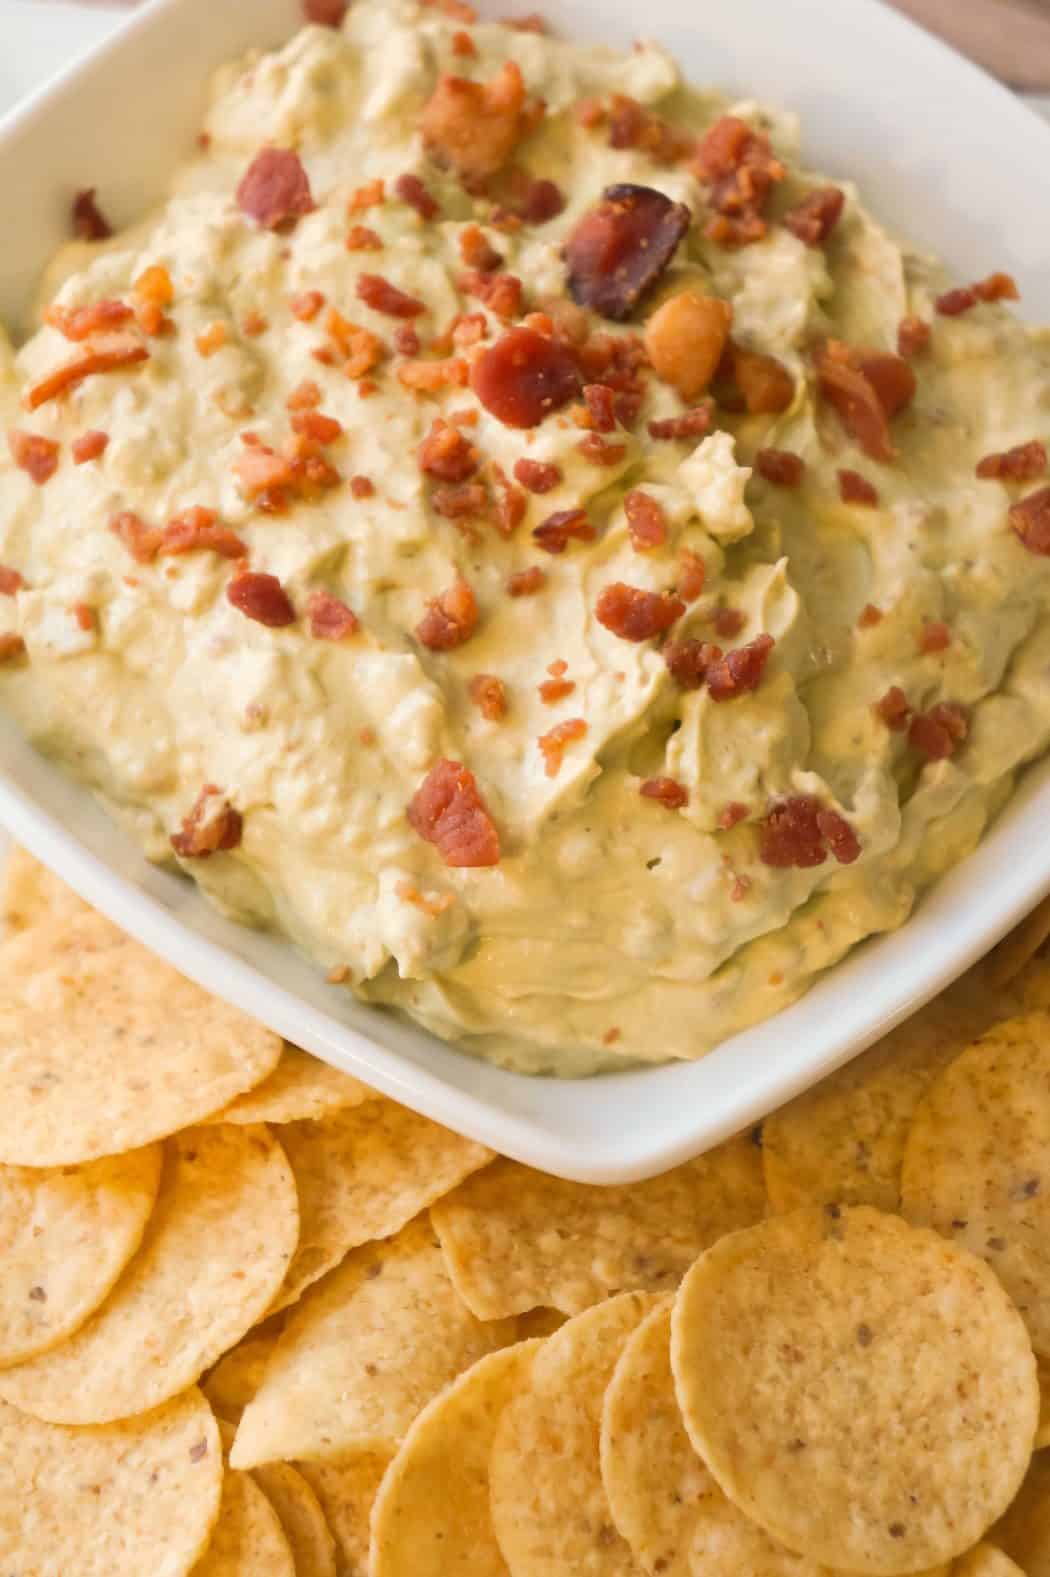 Bacon Cream Cheese Avocado Dip - THIS IS NOT DIET FOOD